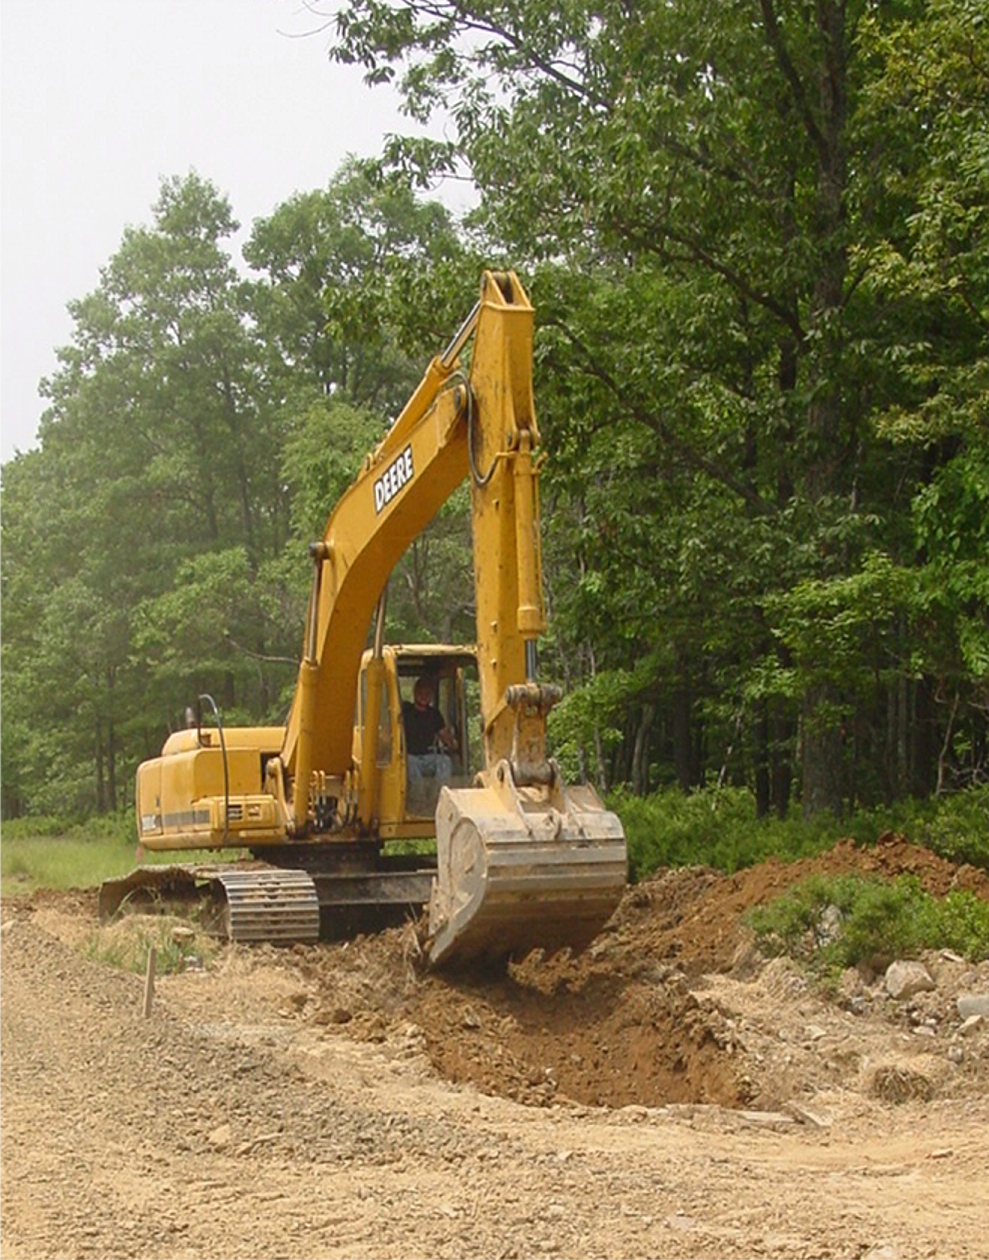 A large construction vehicle digs up soil